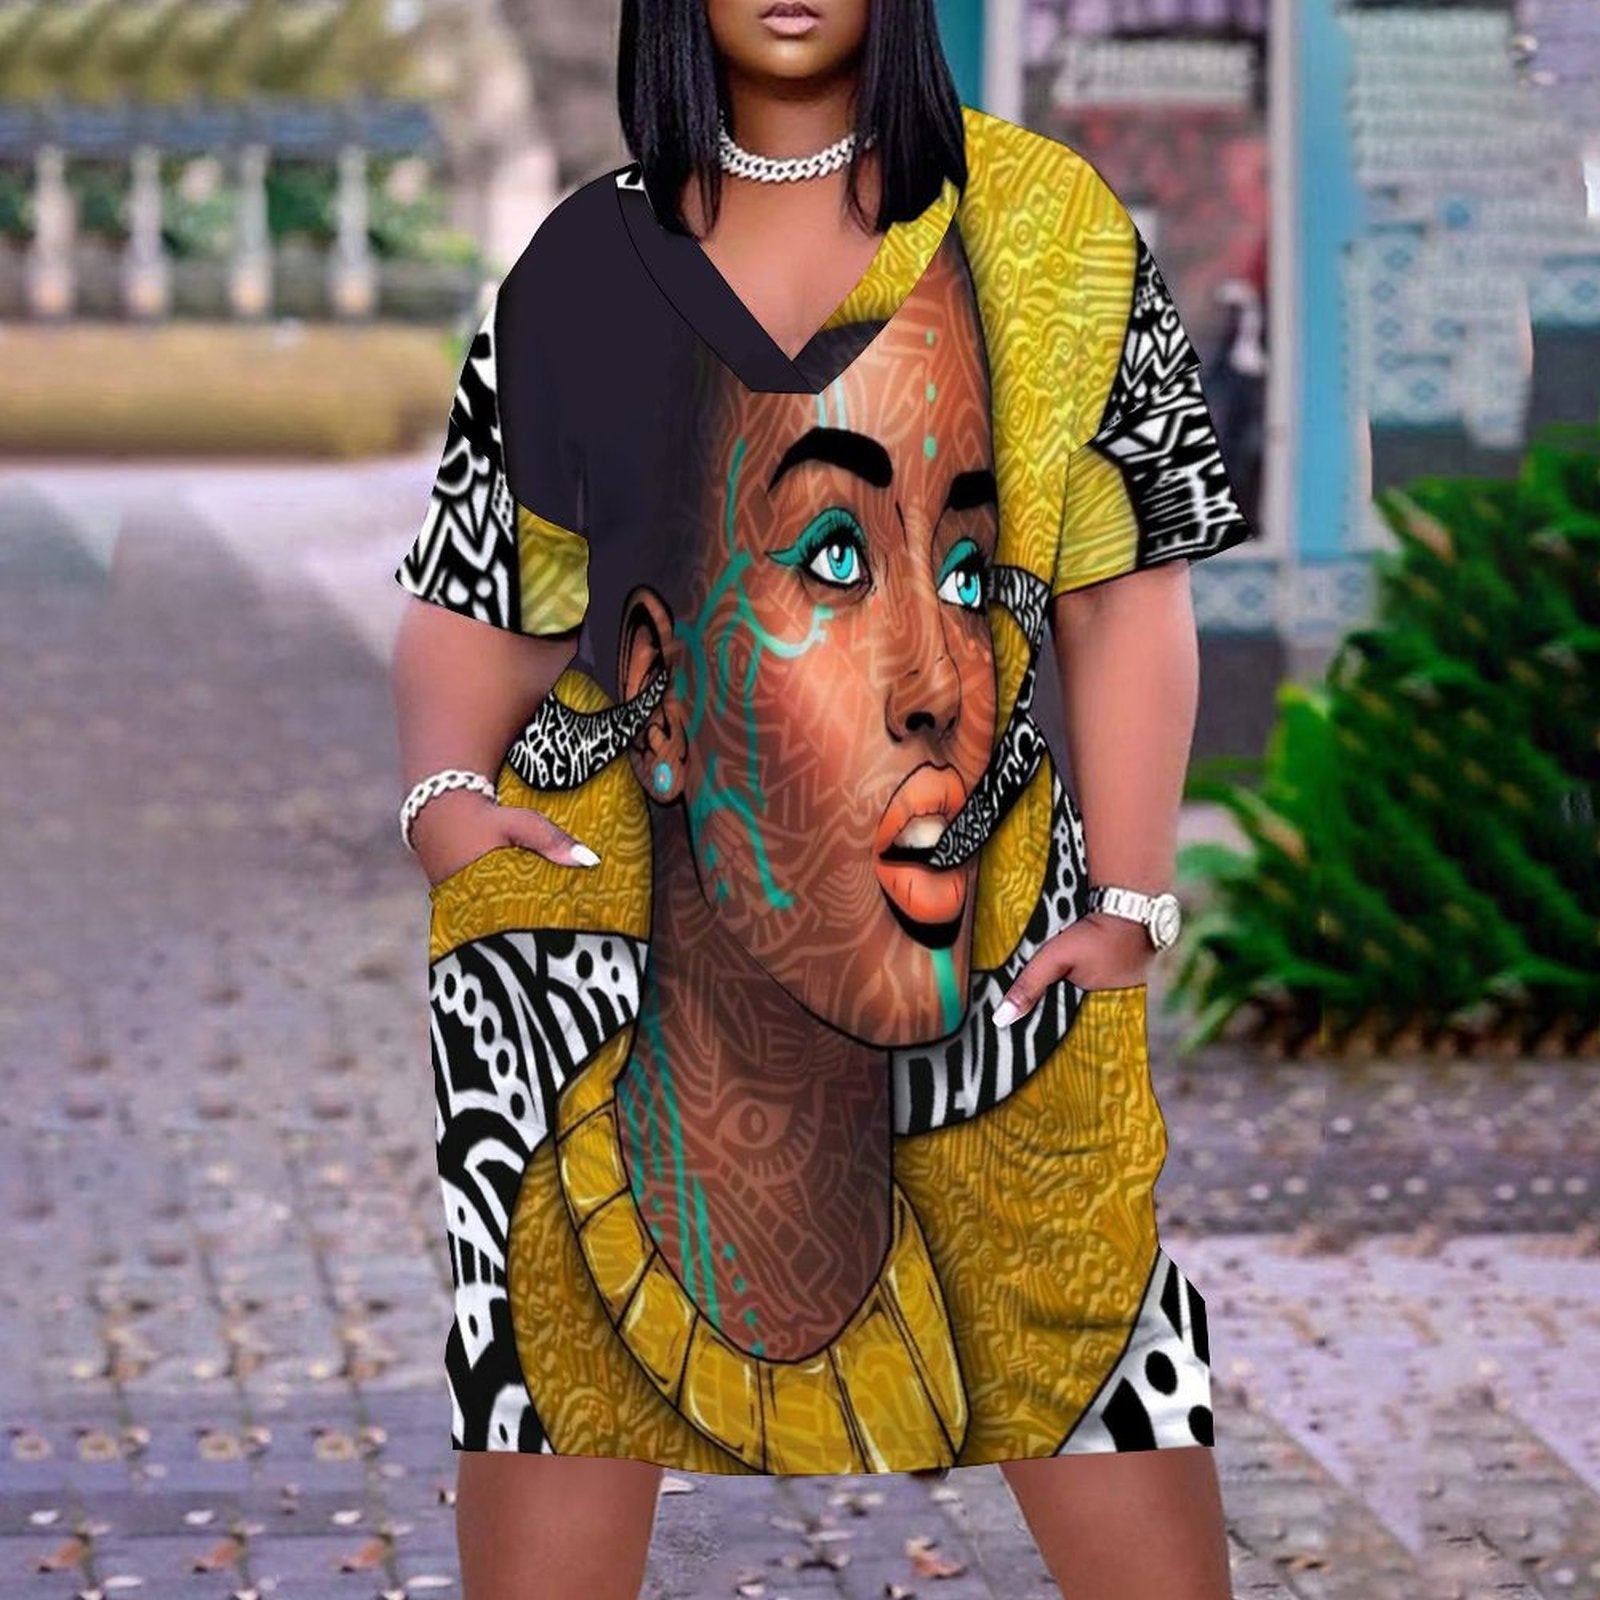 Elegant African Women's Fashion Summer Dress - Flexi Africa - Flexi Africa offers Free Delivery Worldwide - Vibrant African traditional clothing showcasing bold prints and intricate designs